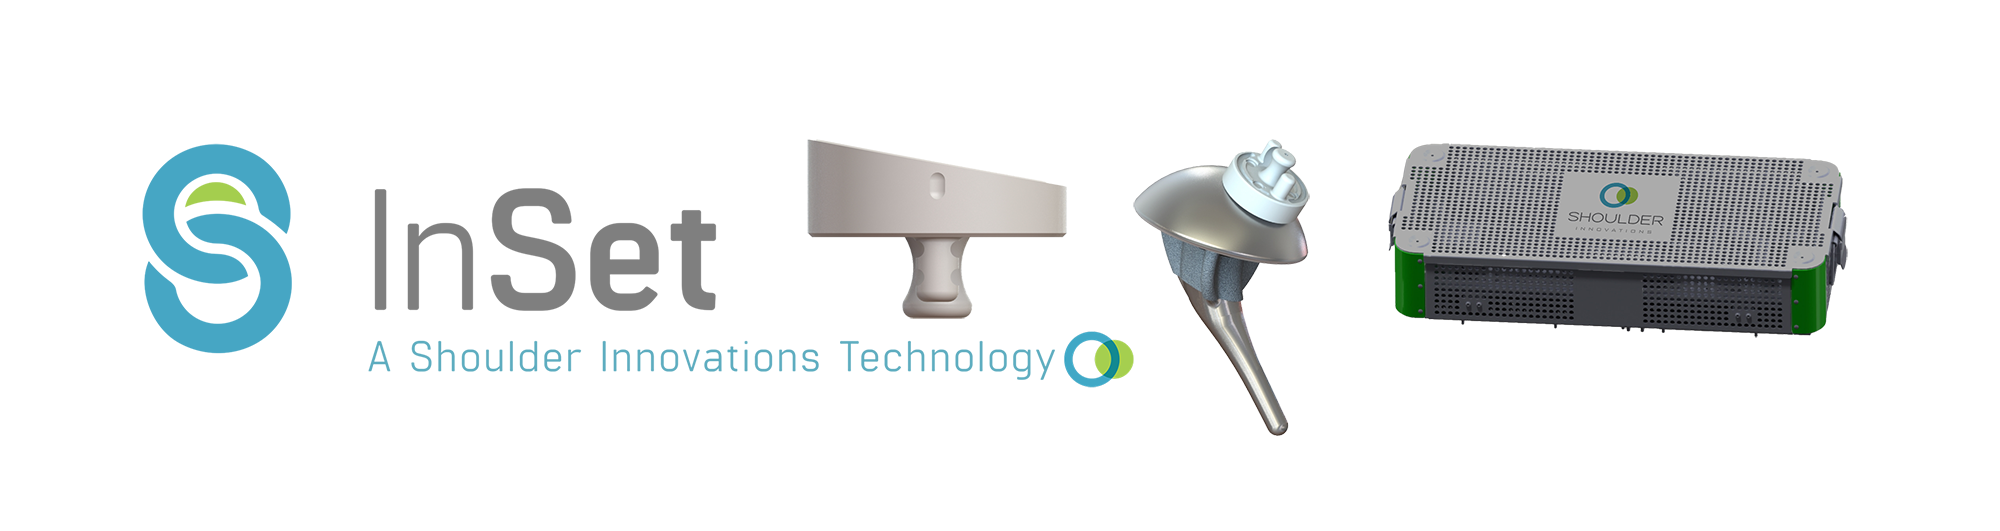 Shoulder Innovations technology is simple, yet significant. This includes their InSet™ Glenoid Implant, InSet™ Humeral Stem, InSet™ PLUS Augmented Glenoid Implant, InSet™ Stemless Shoulder System, InSet™ Reverse Shoulder System, and their One Orthopedic Instrument Tray.